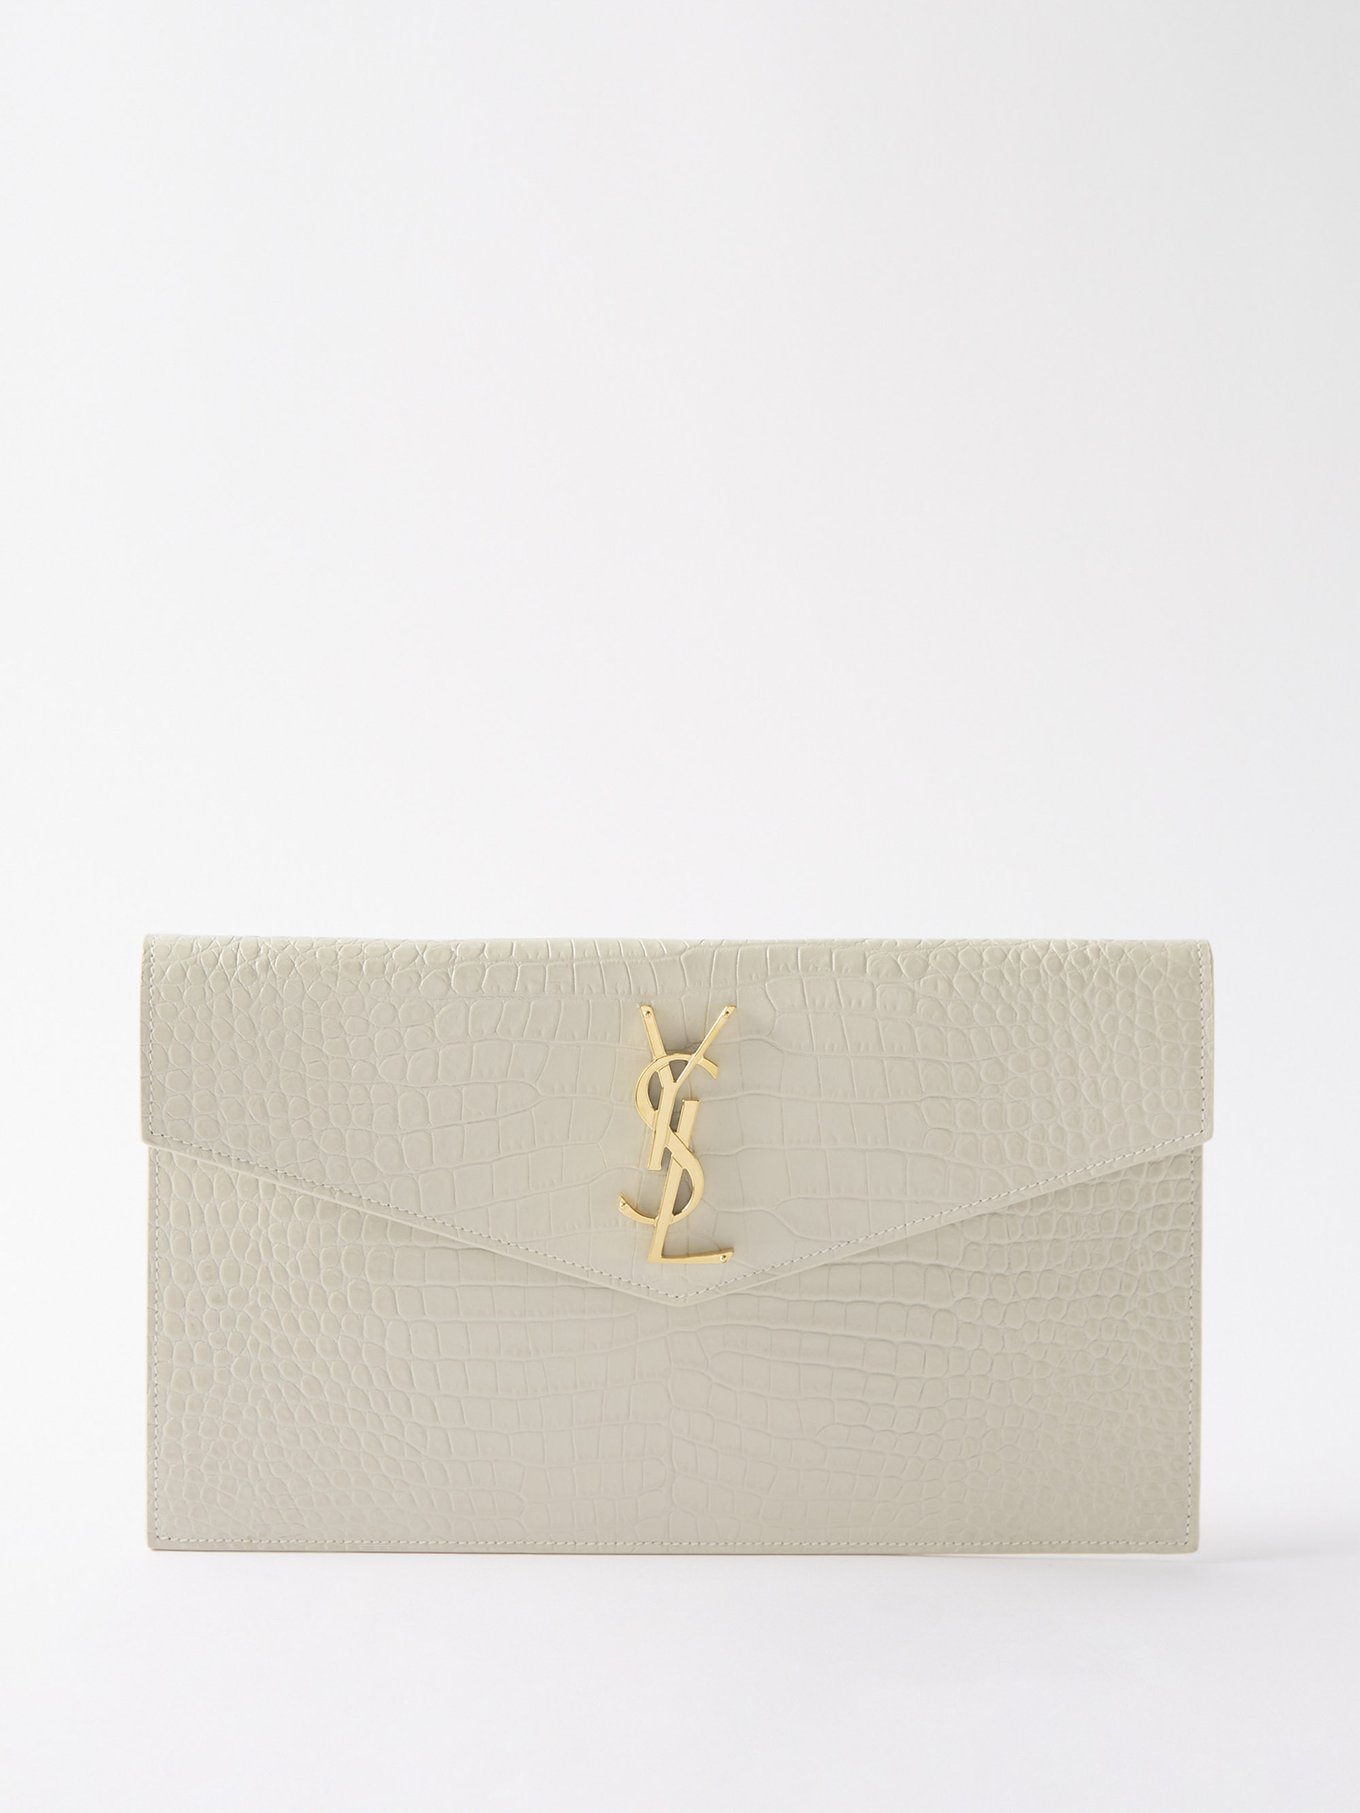 Saint Laurent Uptown Ysl-plaque Croc-effect Leather Pouch in White